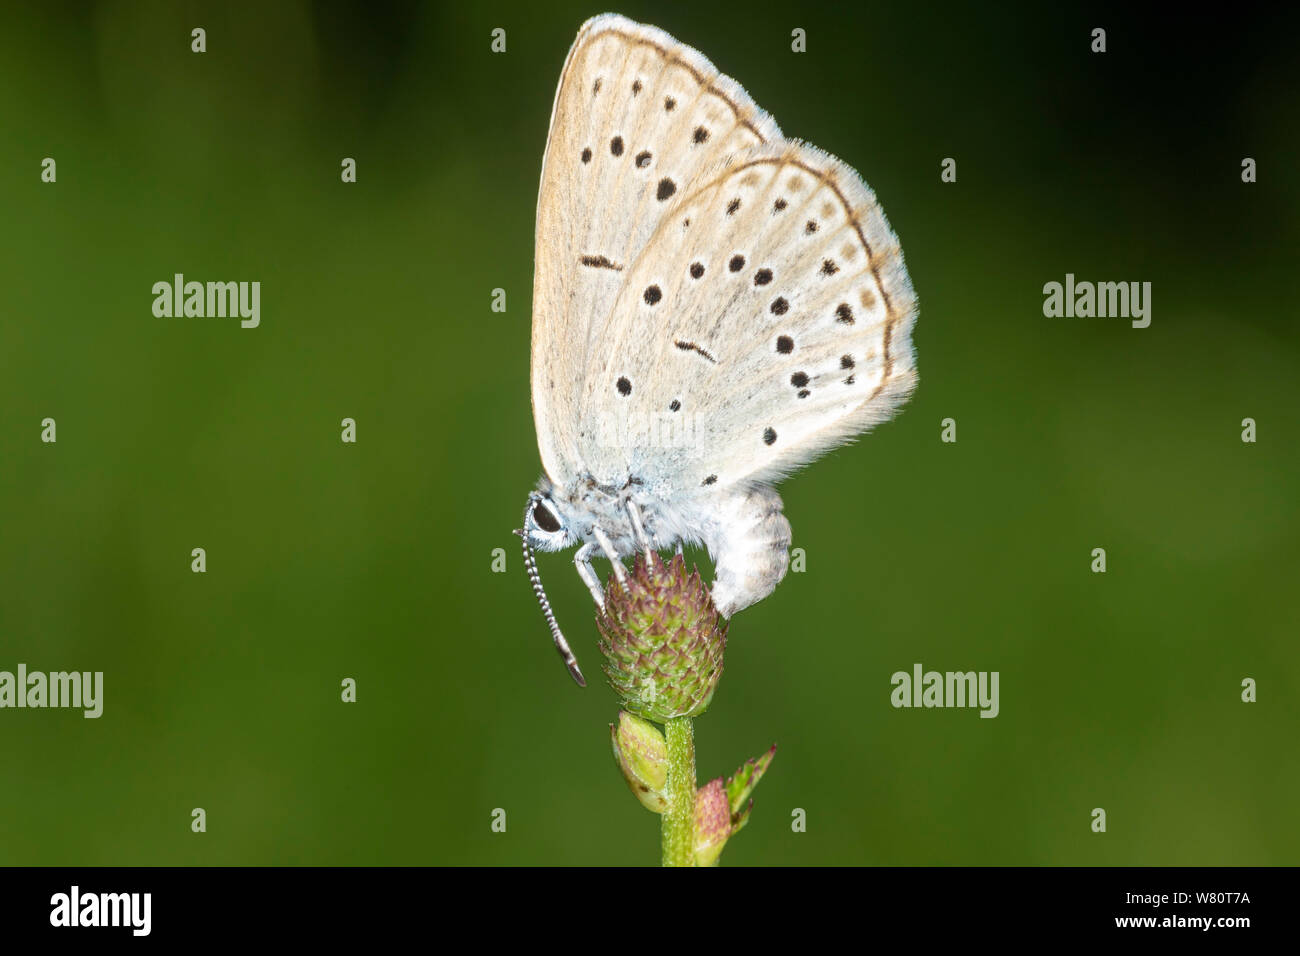 The dusky large blue is laying eggs on a herbaceous plant Sanguisorba officinalis (great burnet) Stock Photo